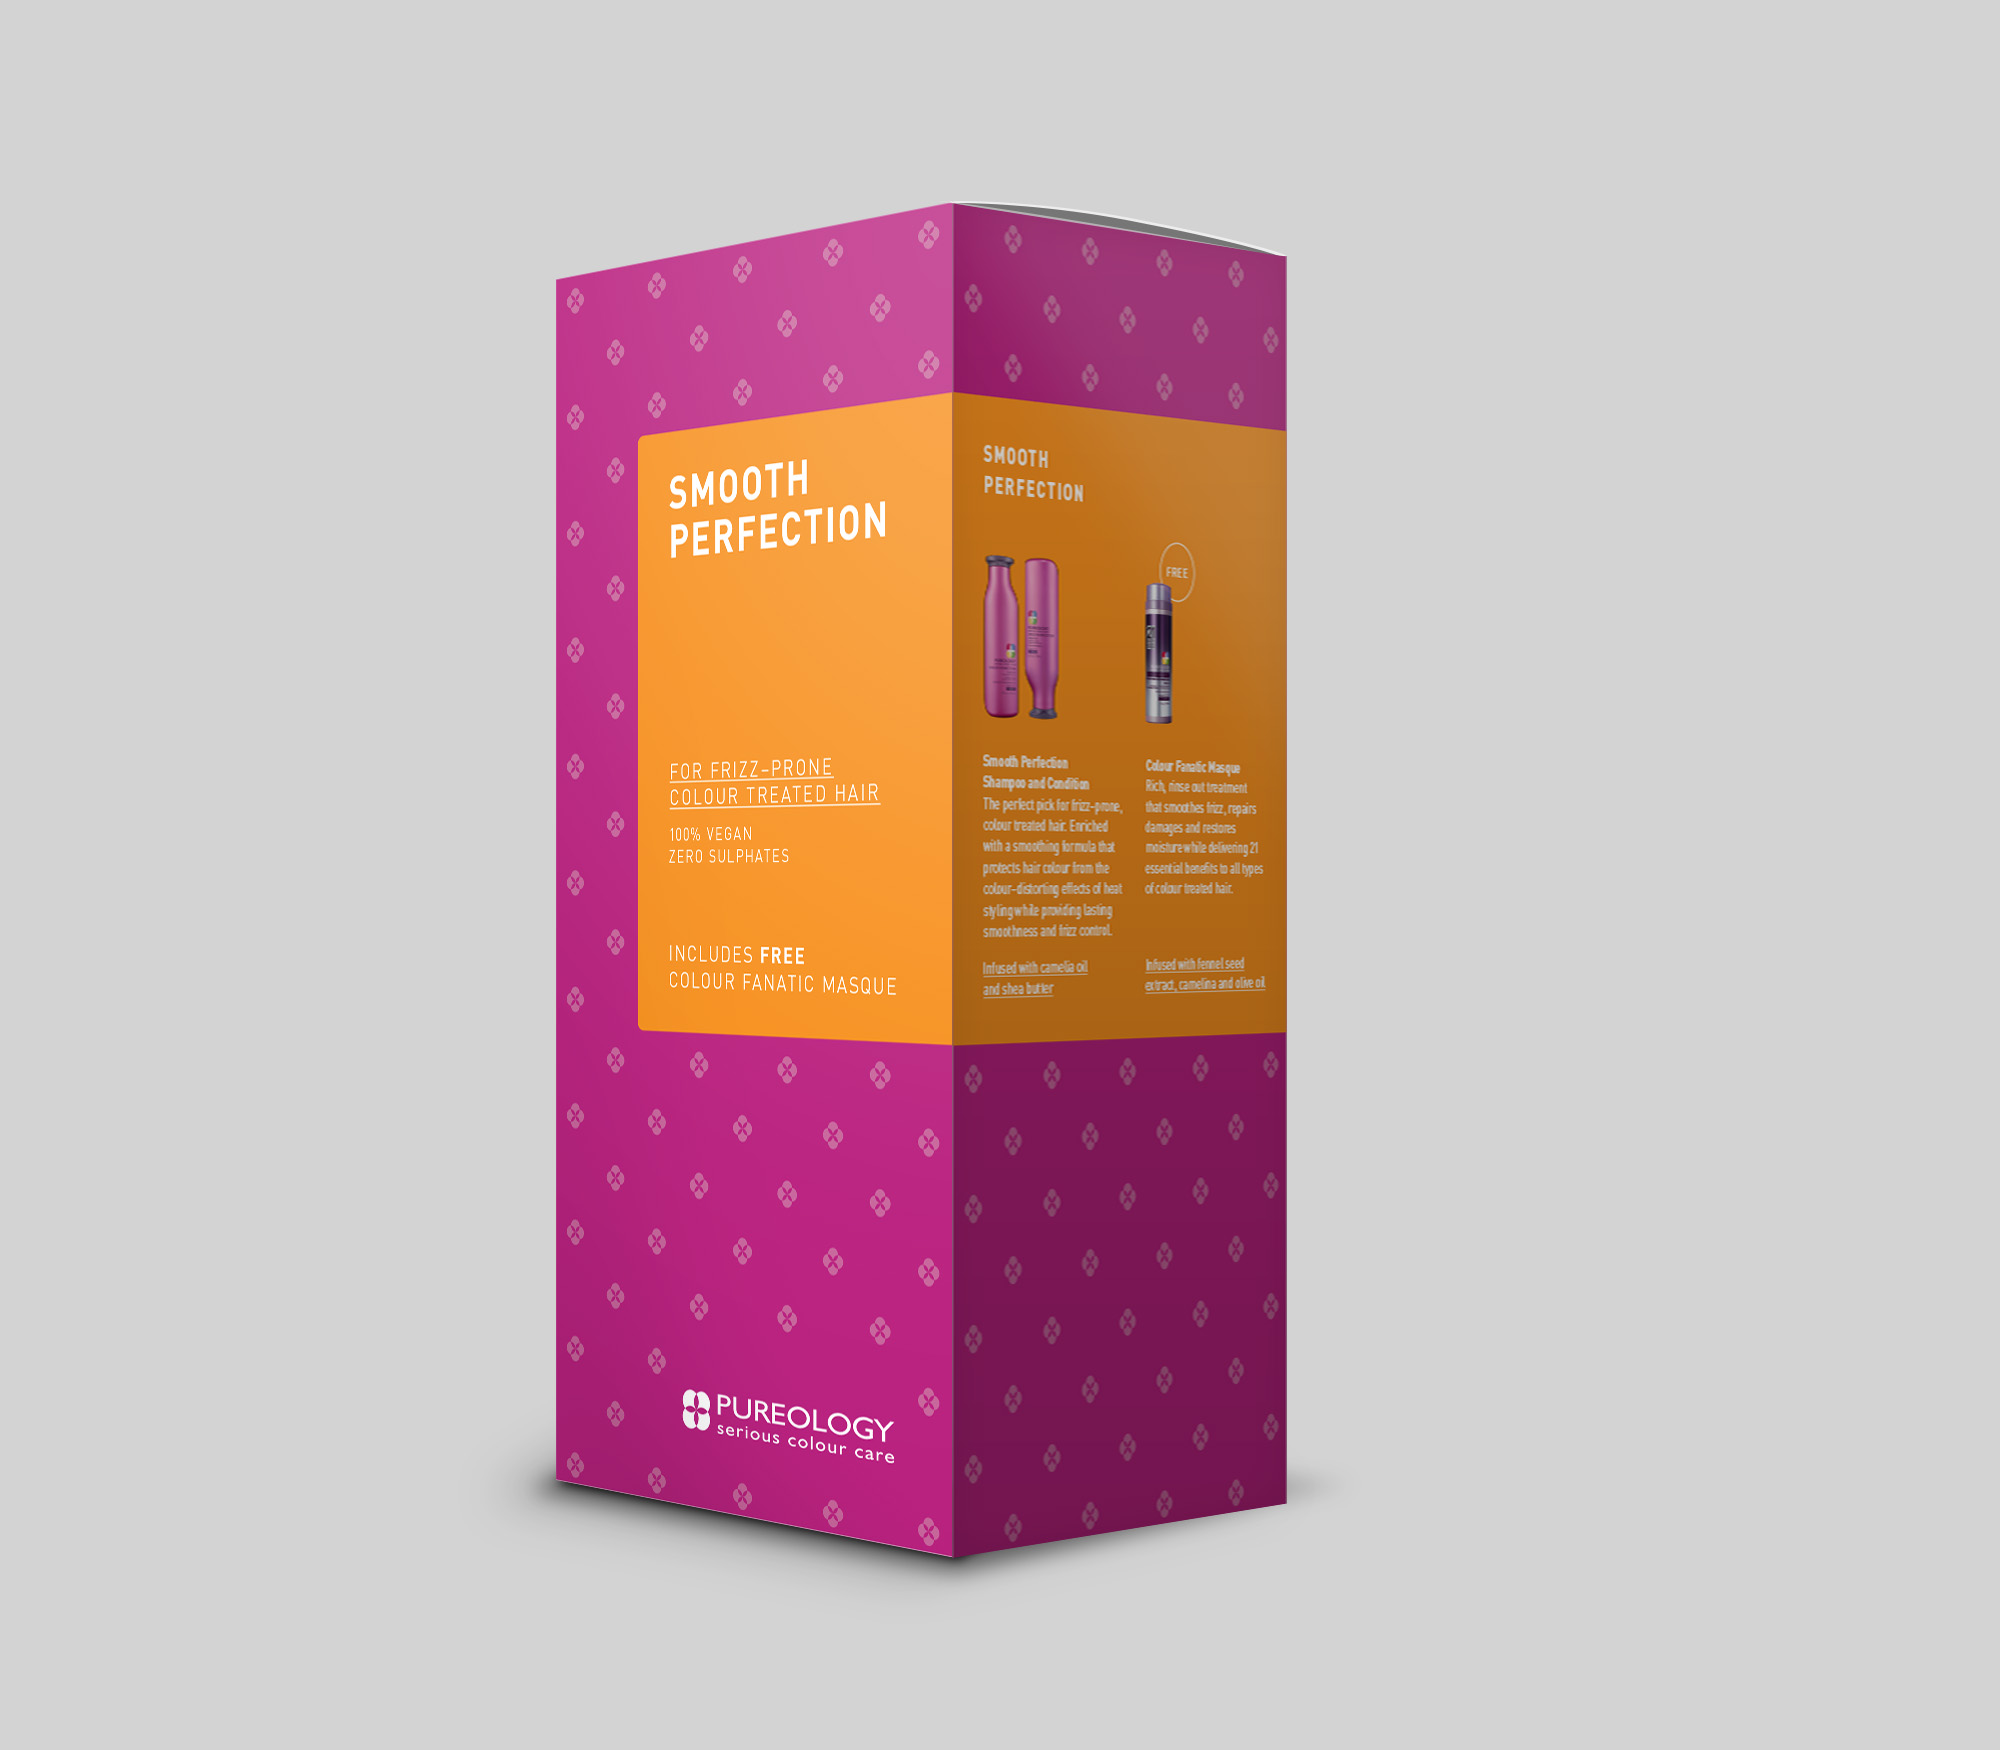 pureology-christmas-pack-2016-smooth-perfection-rrp83